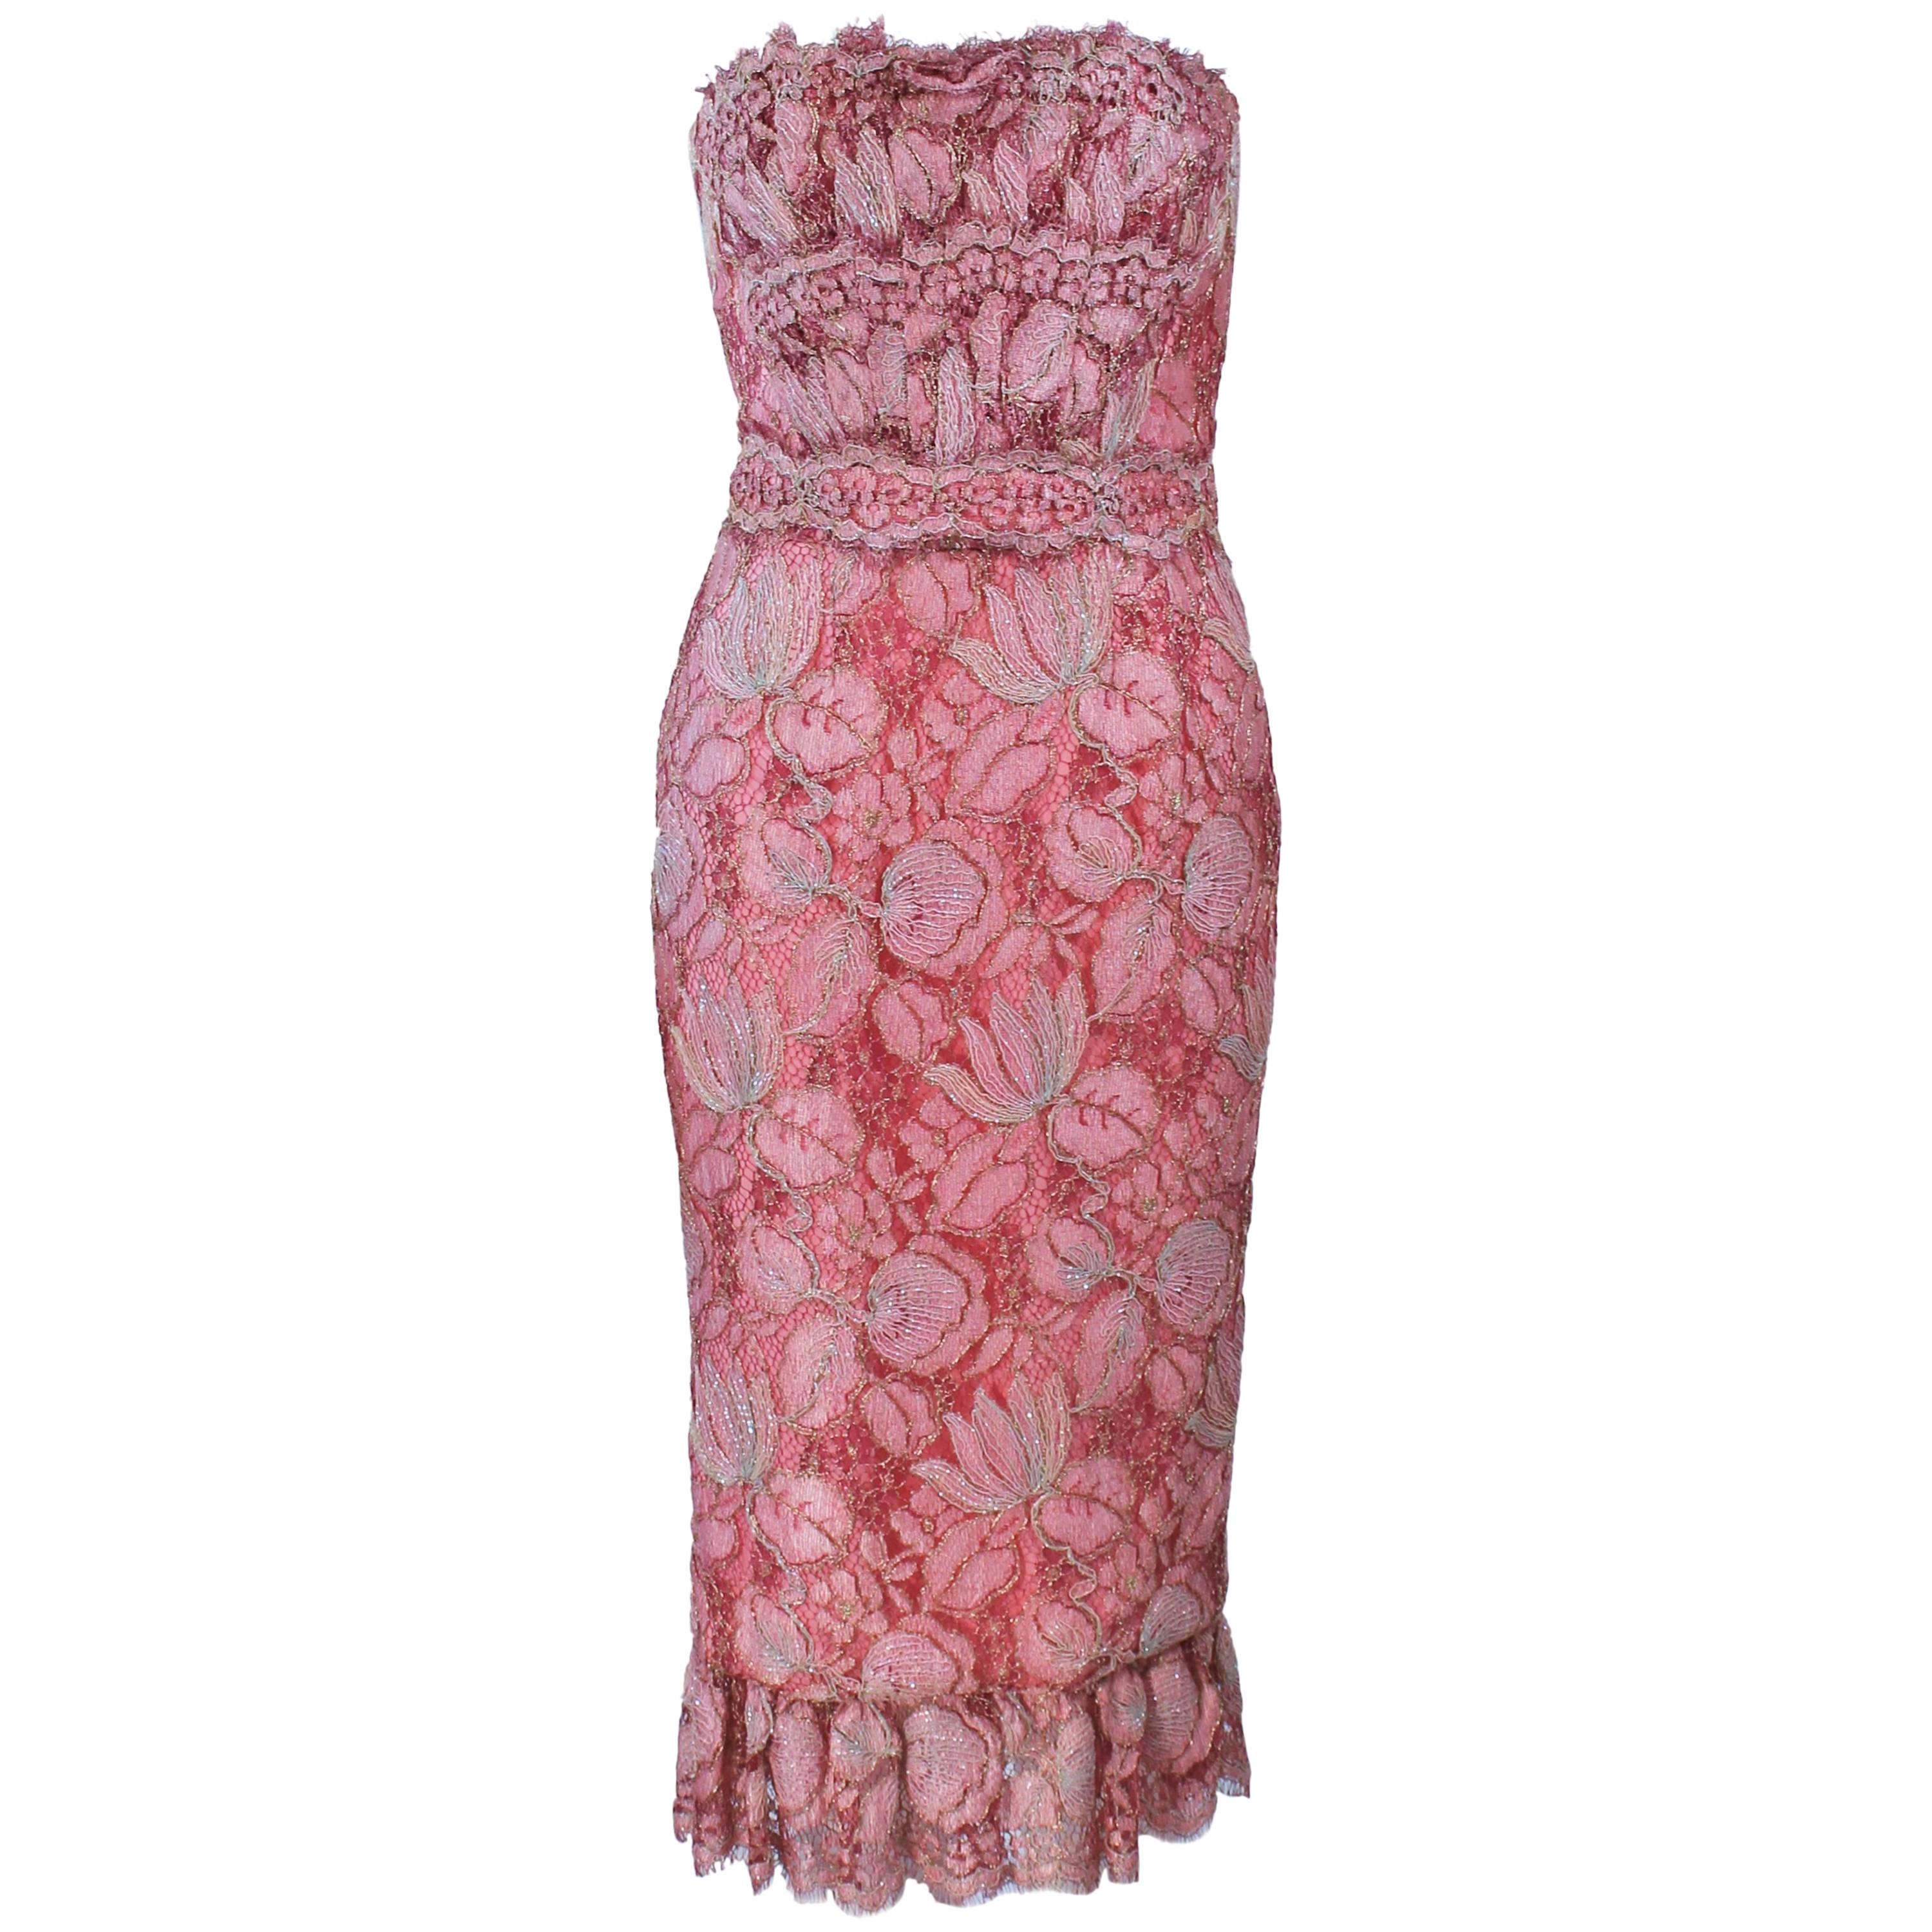 ELIZABETH MASON COUTURE Pink Metallic Lace Cocktail Dress Size 2 Made to Order